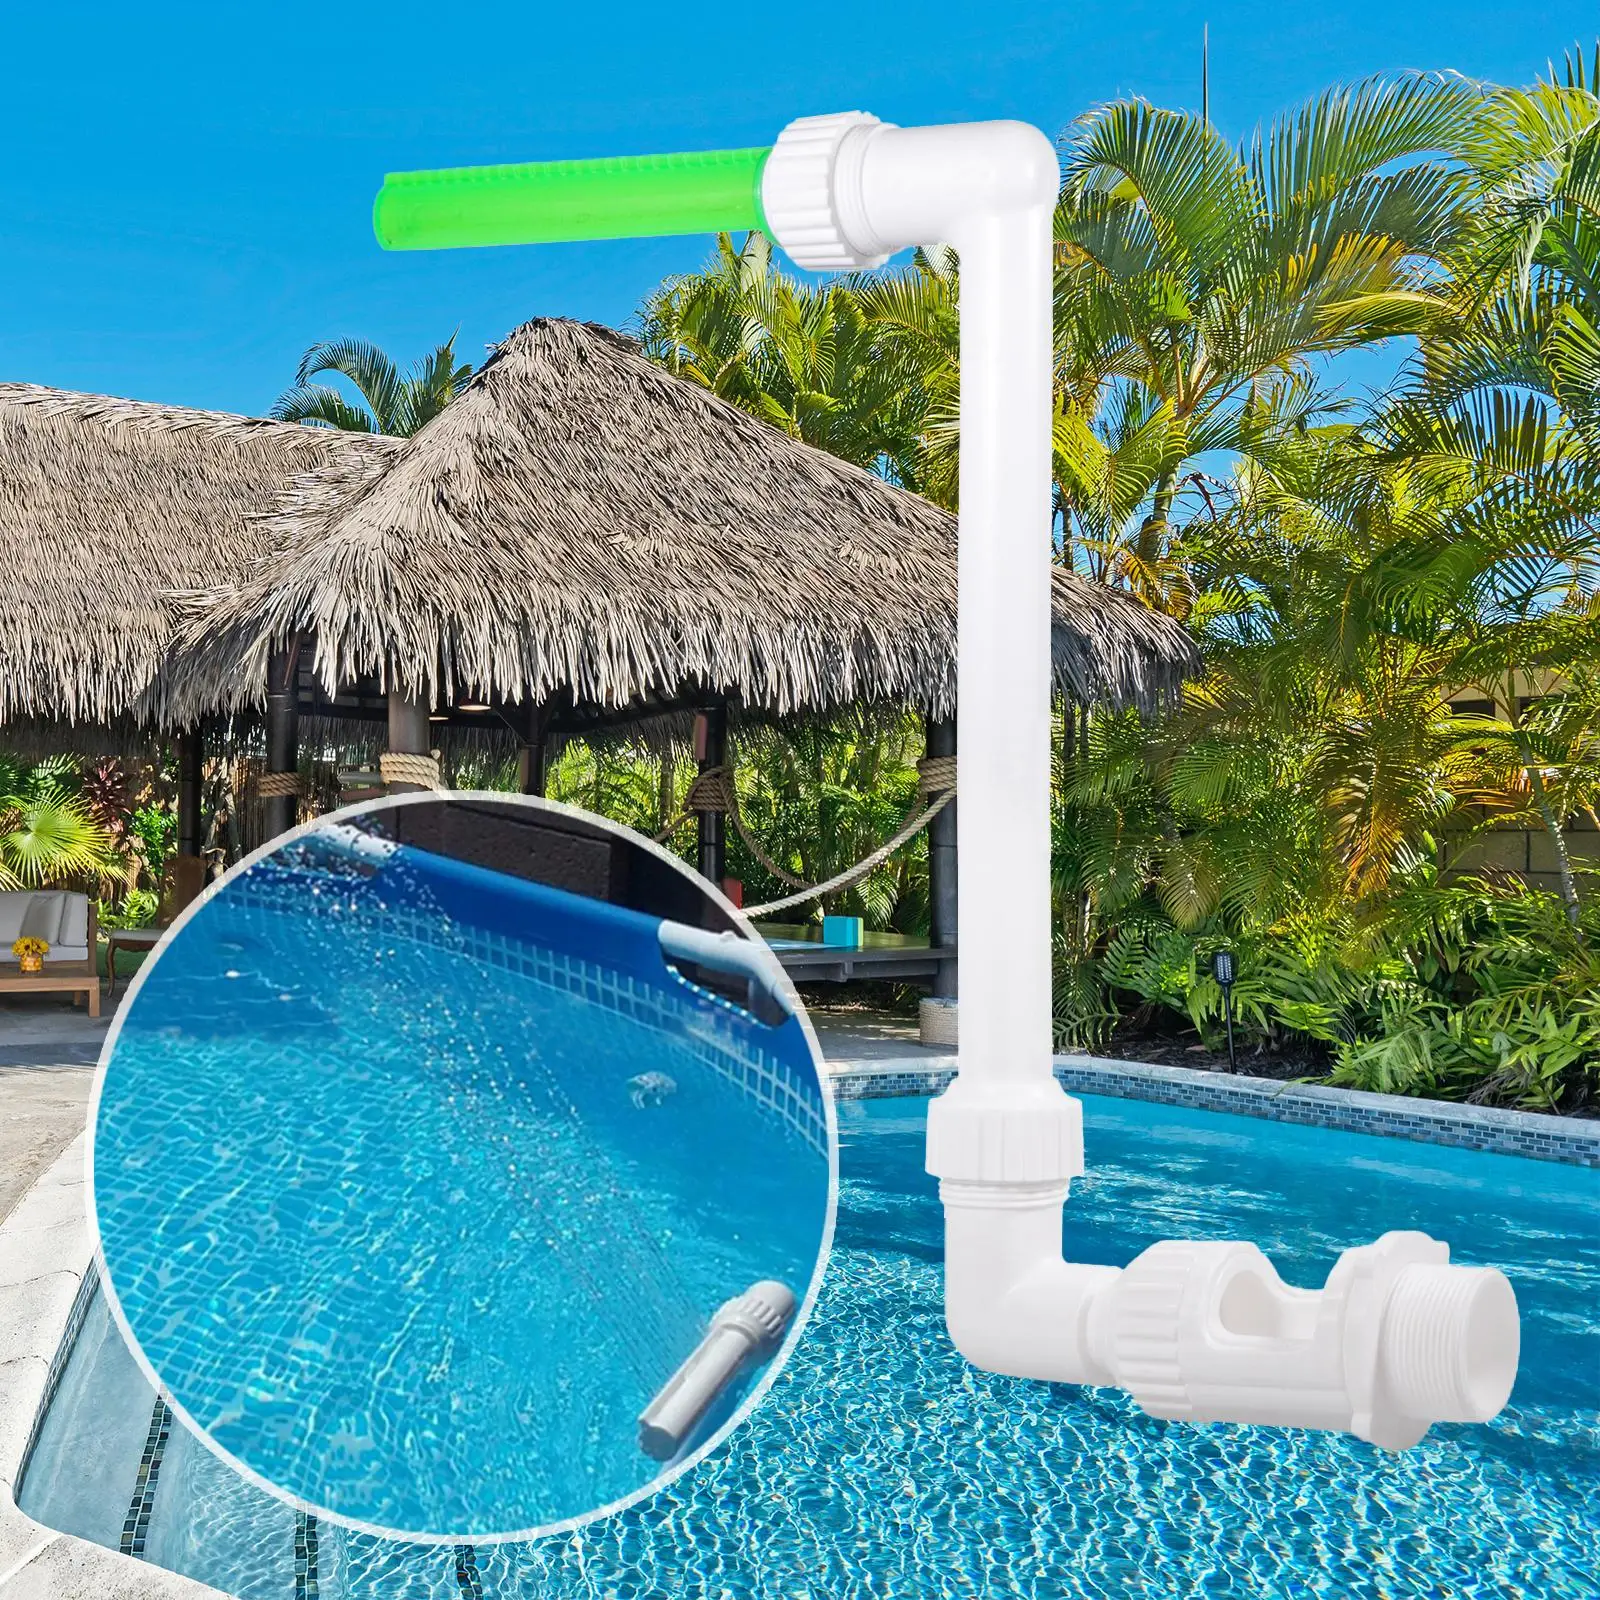 Pool Waterfall Fountain Pool Accessories Water for Yard Outdoor Decor